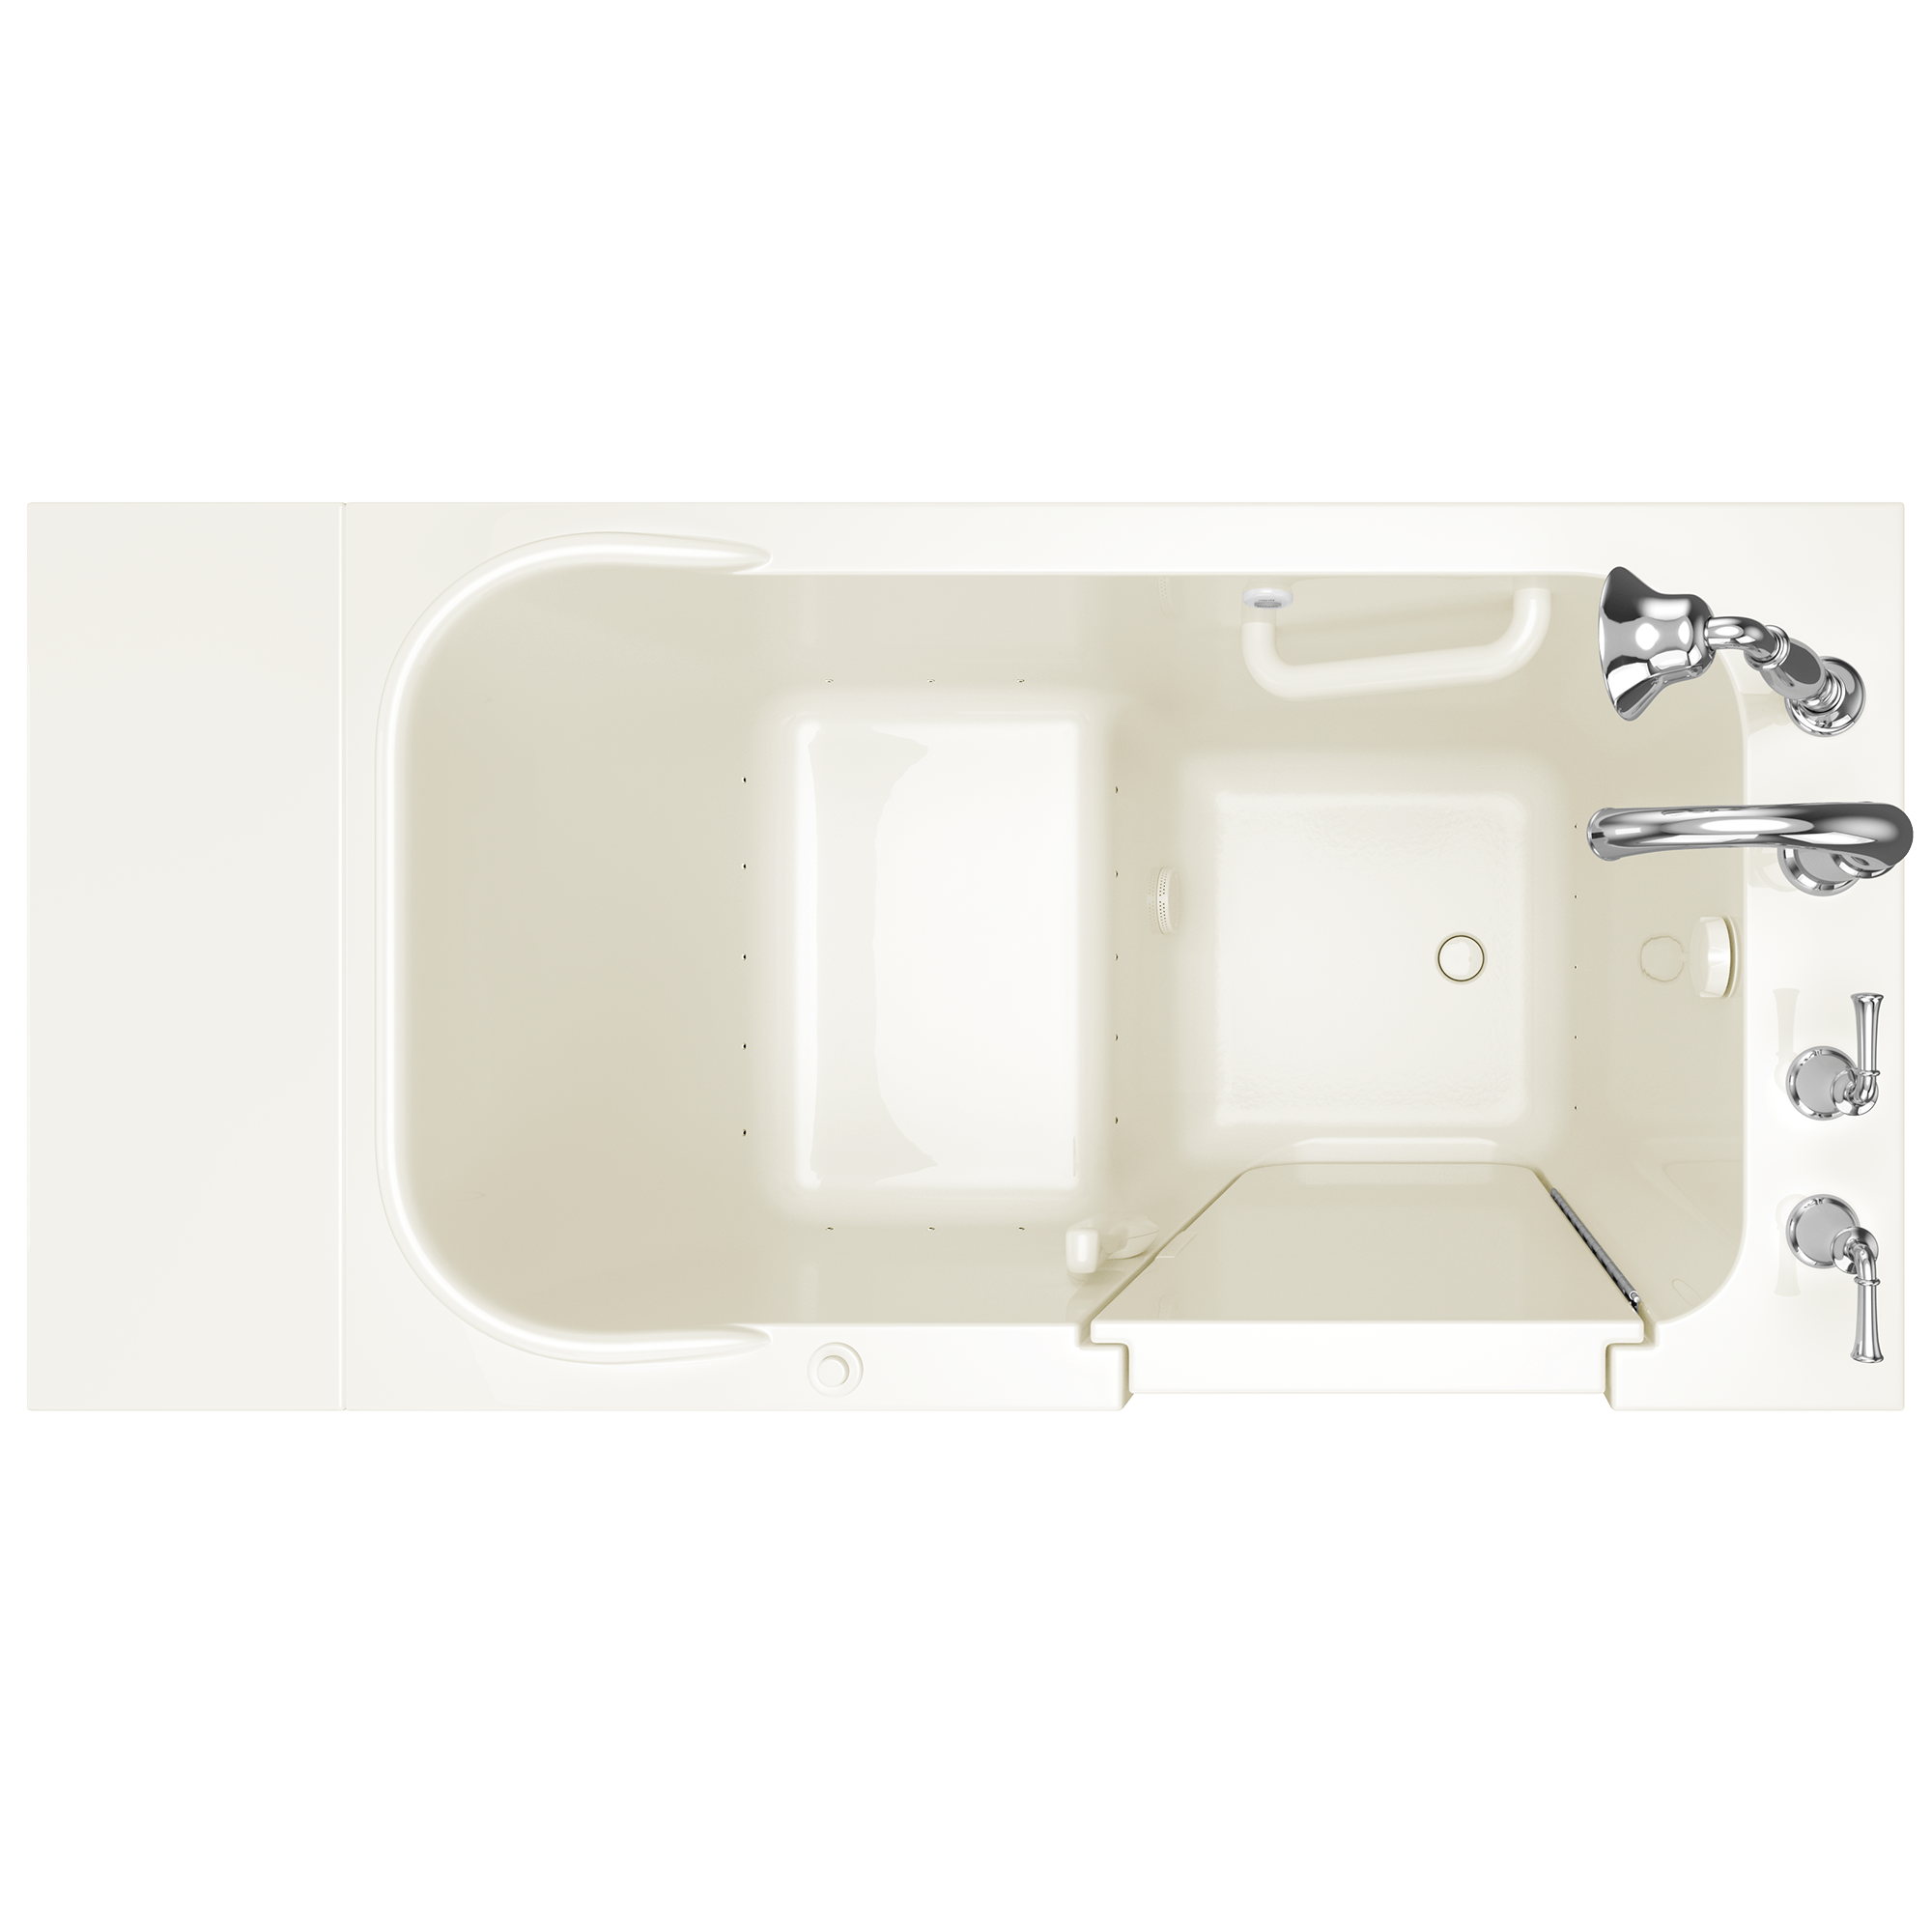 GEL Walk In Tub 48LX28WX38H Right Hand AIR Biscuit ST BISCUIT